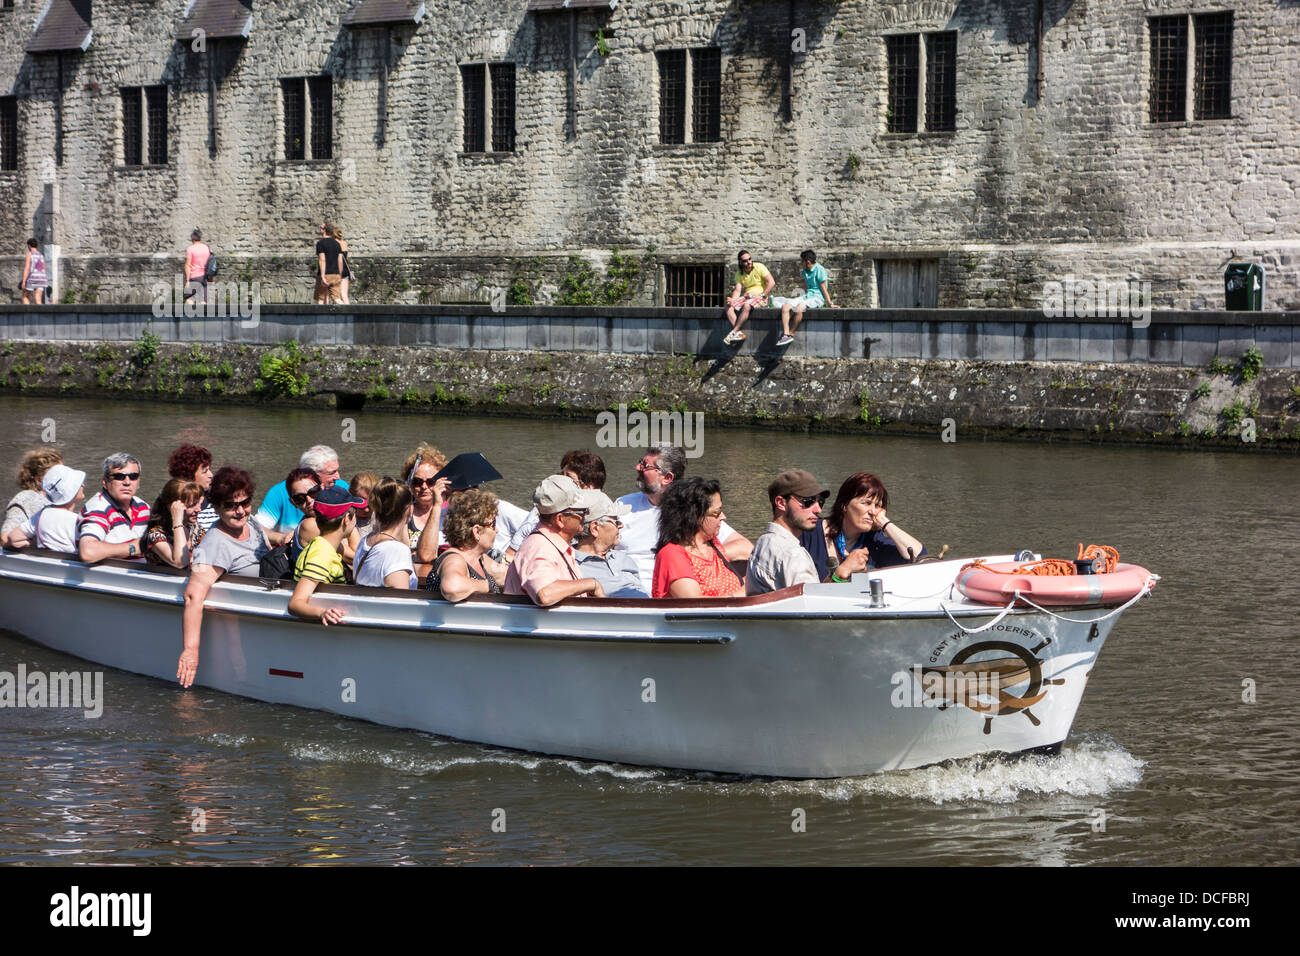 Tourists in boat on the river Leie / Lys during sightseeing trip looking at  the Groot Vleeshuis / Big Butchery in Ghent, Belgium Stock Photo - Alamy